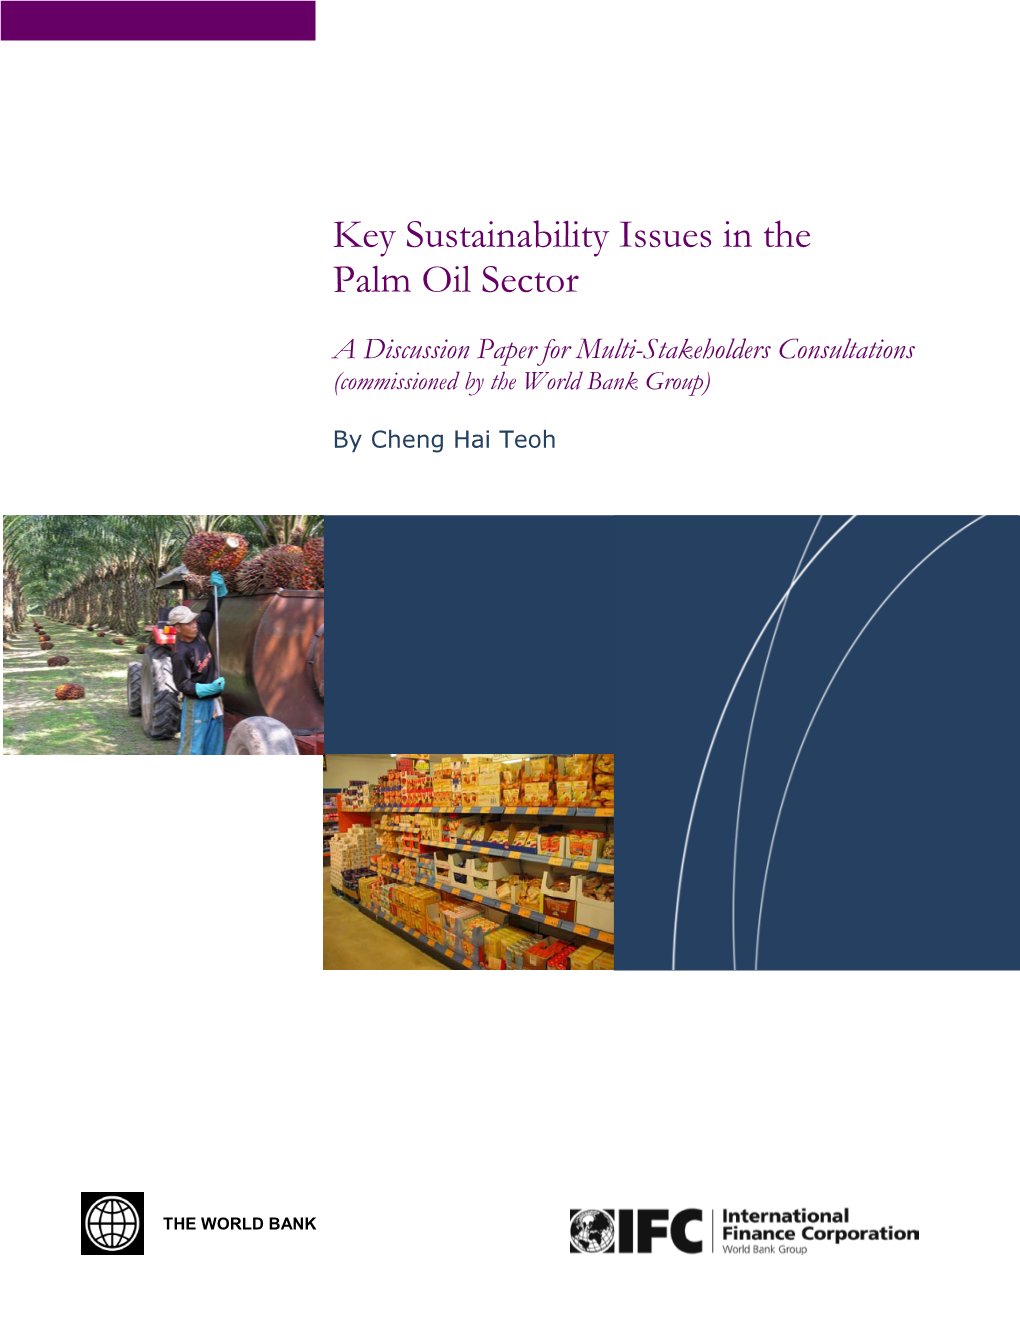 Key Sustainability Issues in the Palm Oil Sector